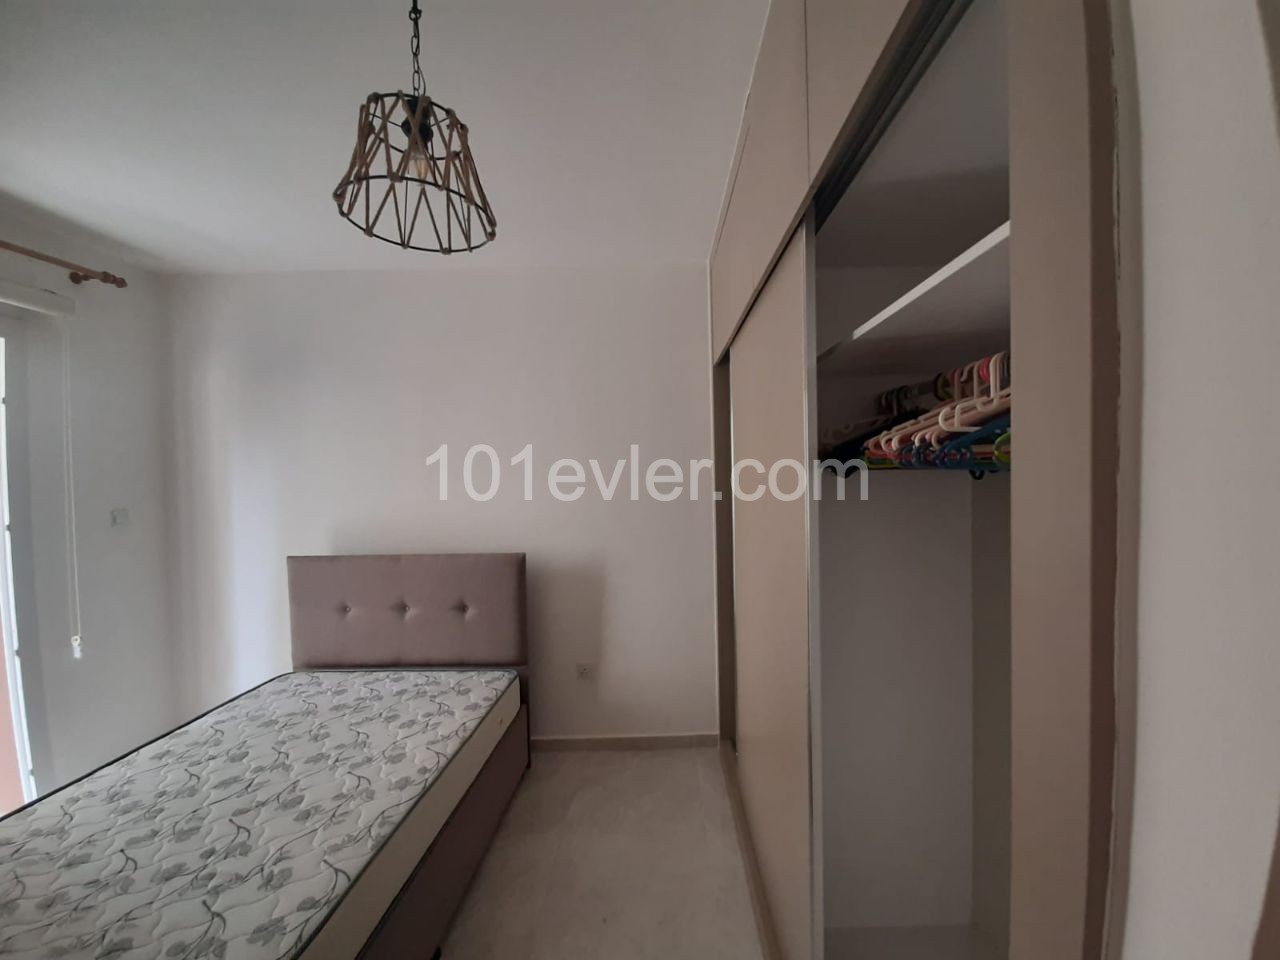 Sakarya 2 + 1 rent house weder Llosa home noch Llosa Apartment 10 months payment 4000 $ Anzahlung 400$ Commission 400$ ** 